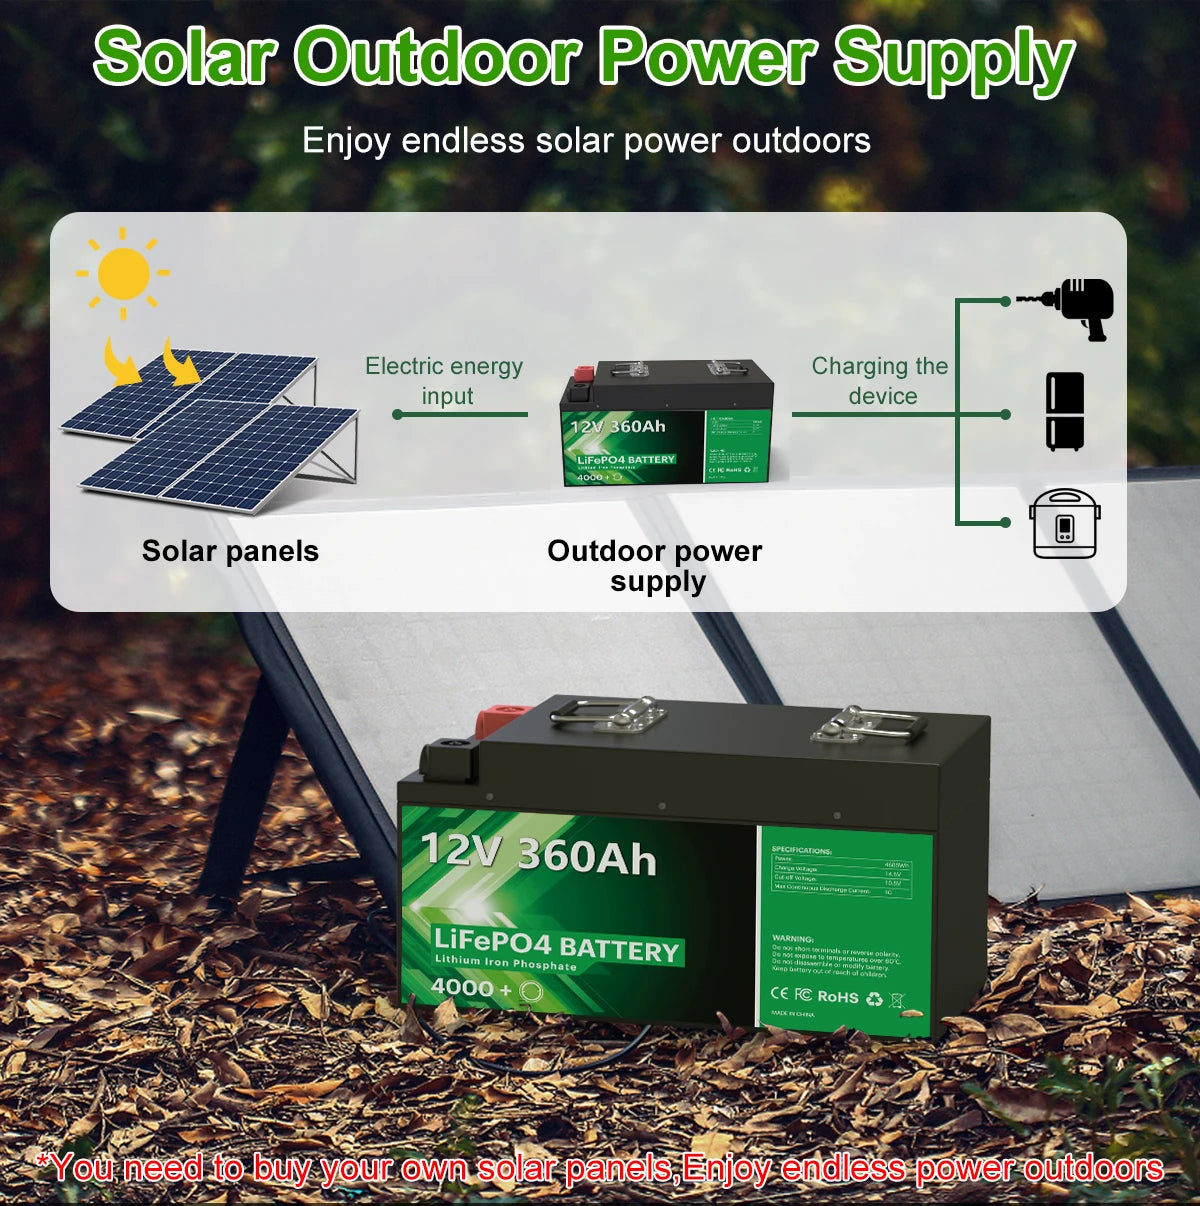 12V 360Ah 280AH LiFePO4 Battery, Off-grid power with 12V 360Ah LiFePO4 battery pack, charges via solar panels for endless energy.